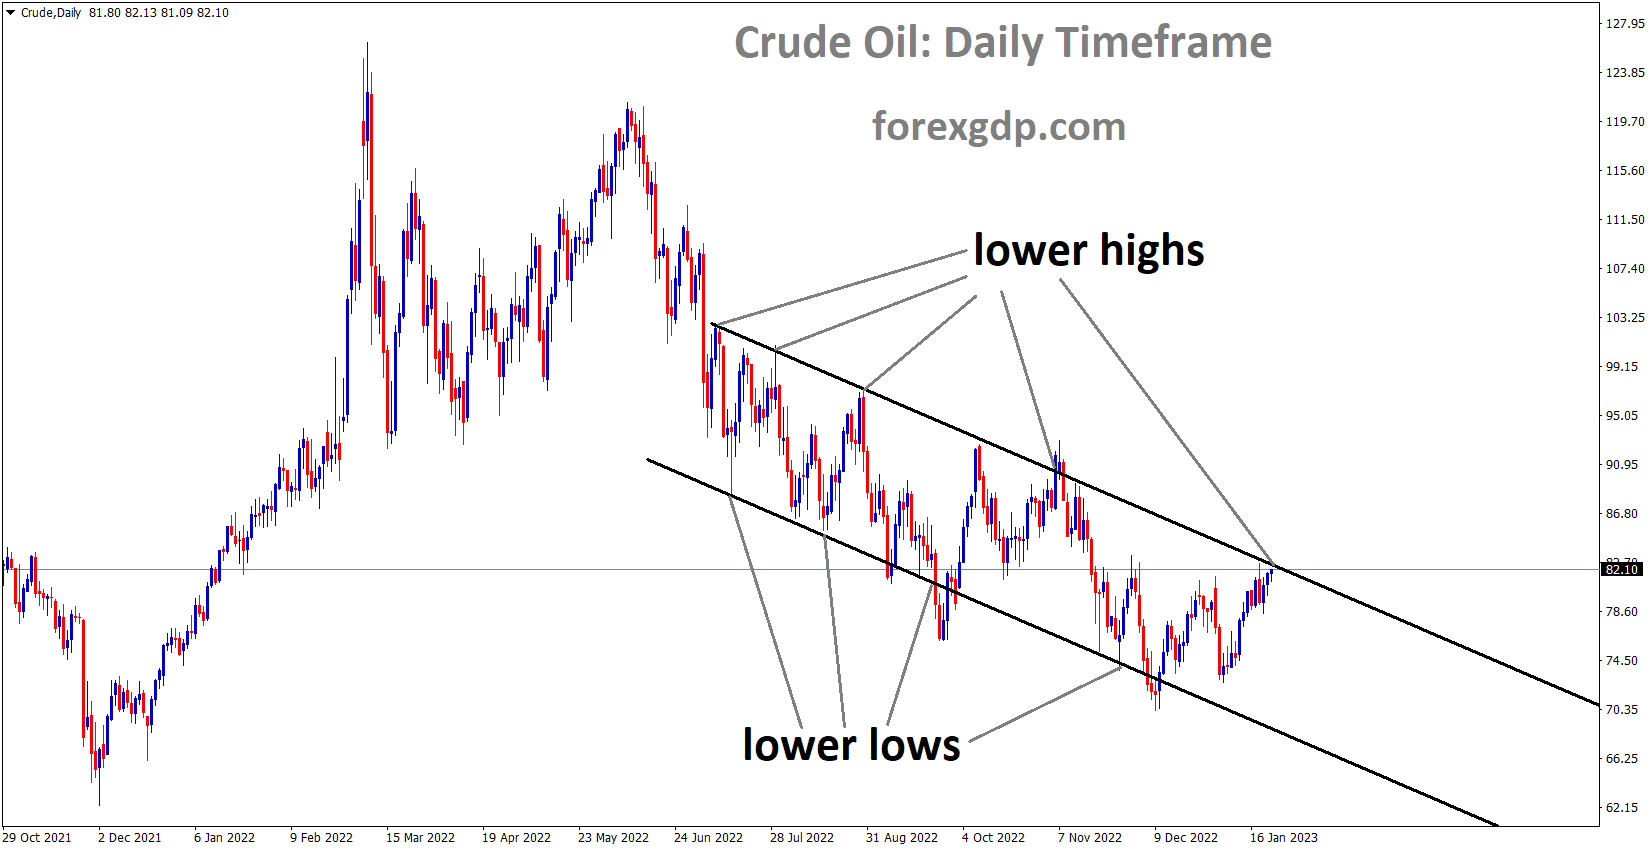 Crude Oil Price is moving in the Descending channel and the market has reached the lower high area of the channel